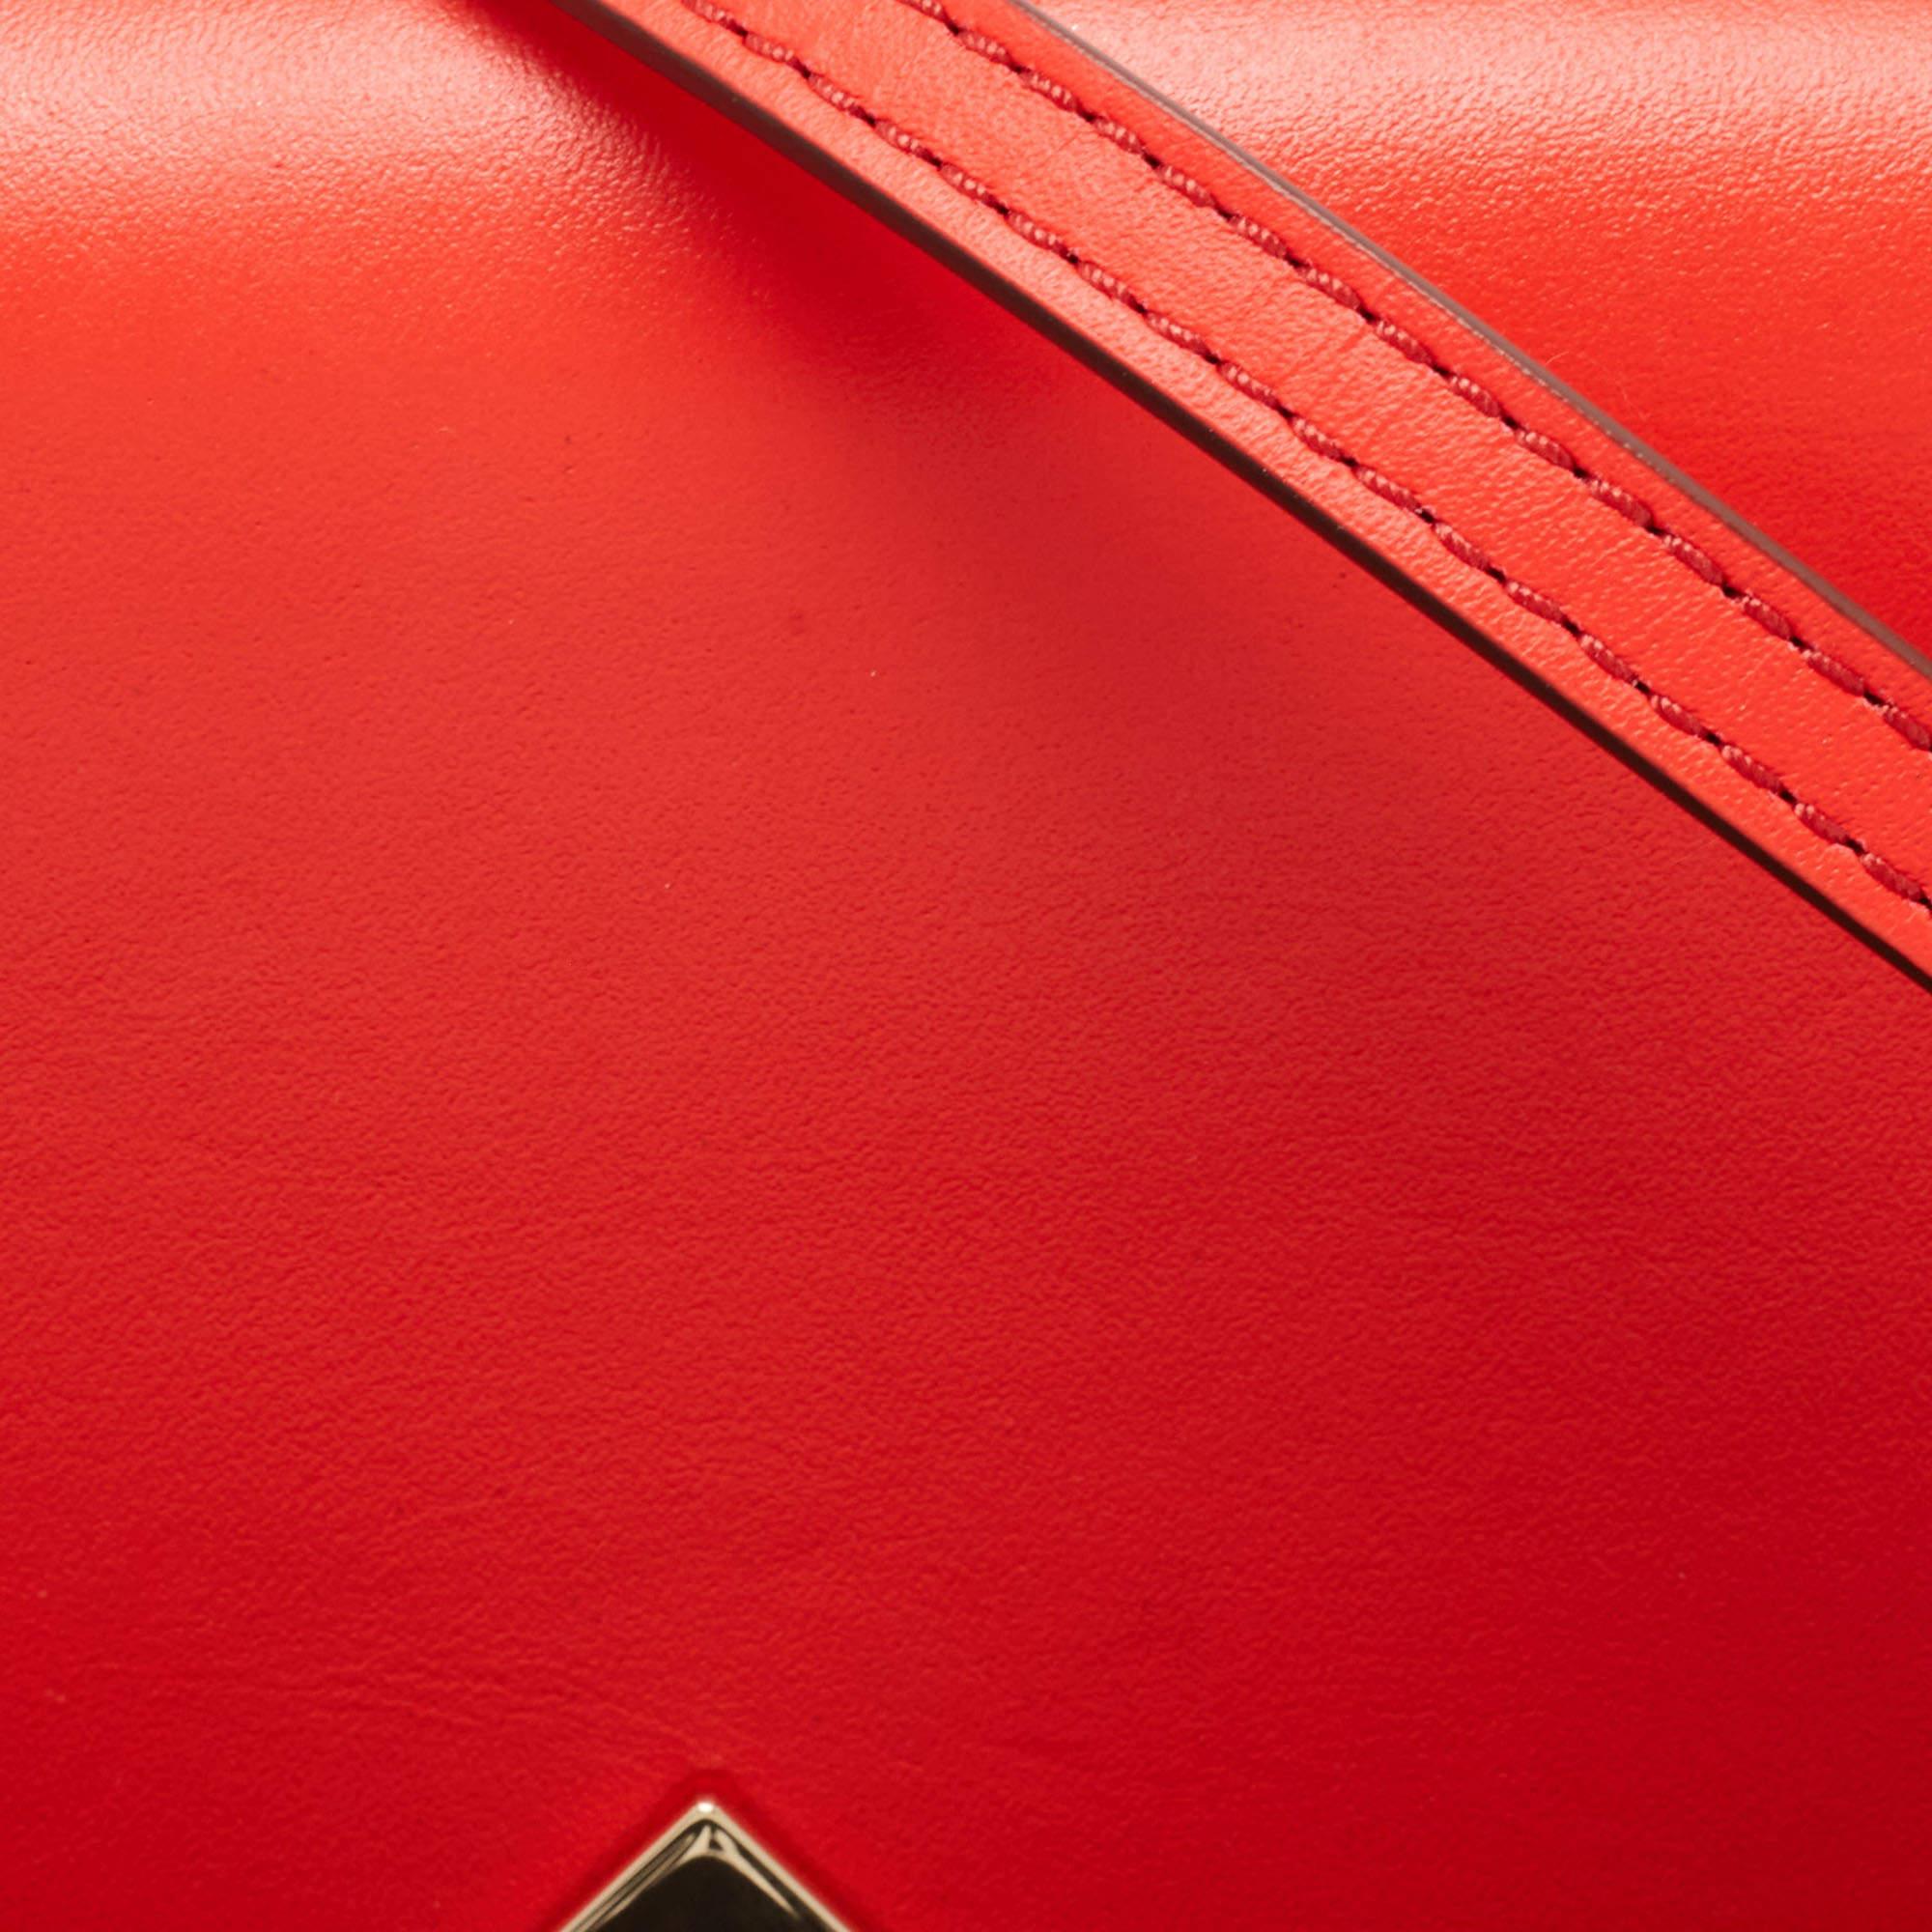 Emporio Armani Neon Red Leather Flap Crossbody Bag For Sale 8